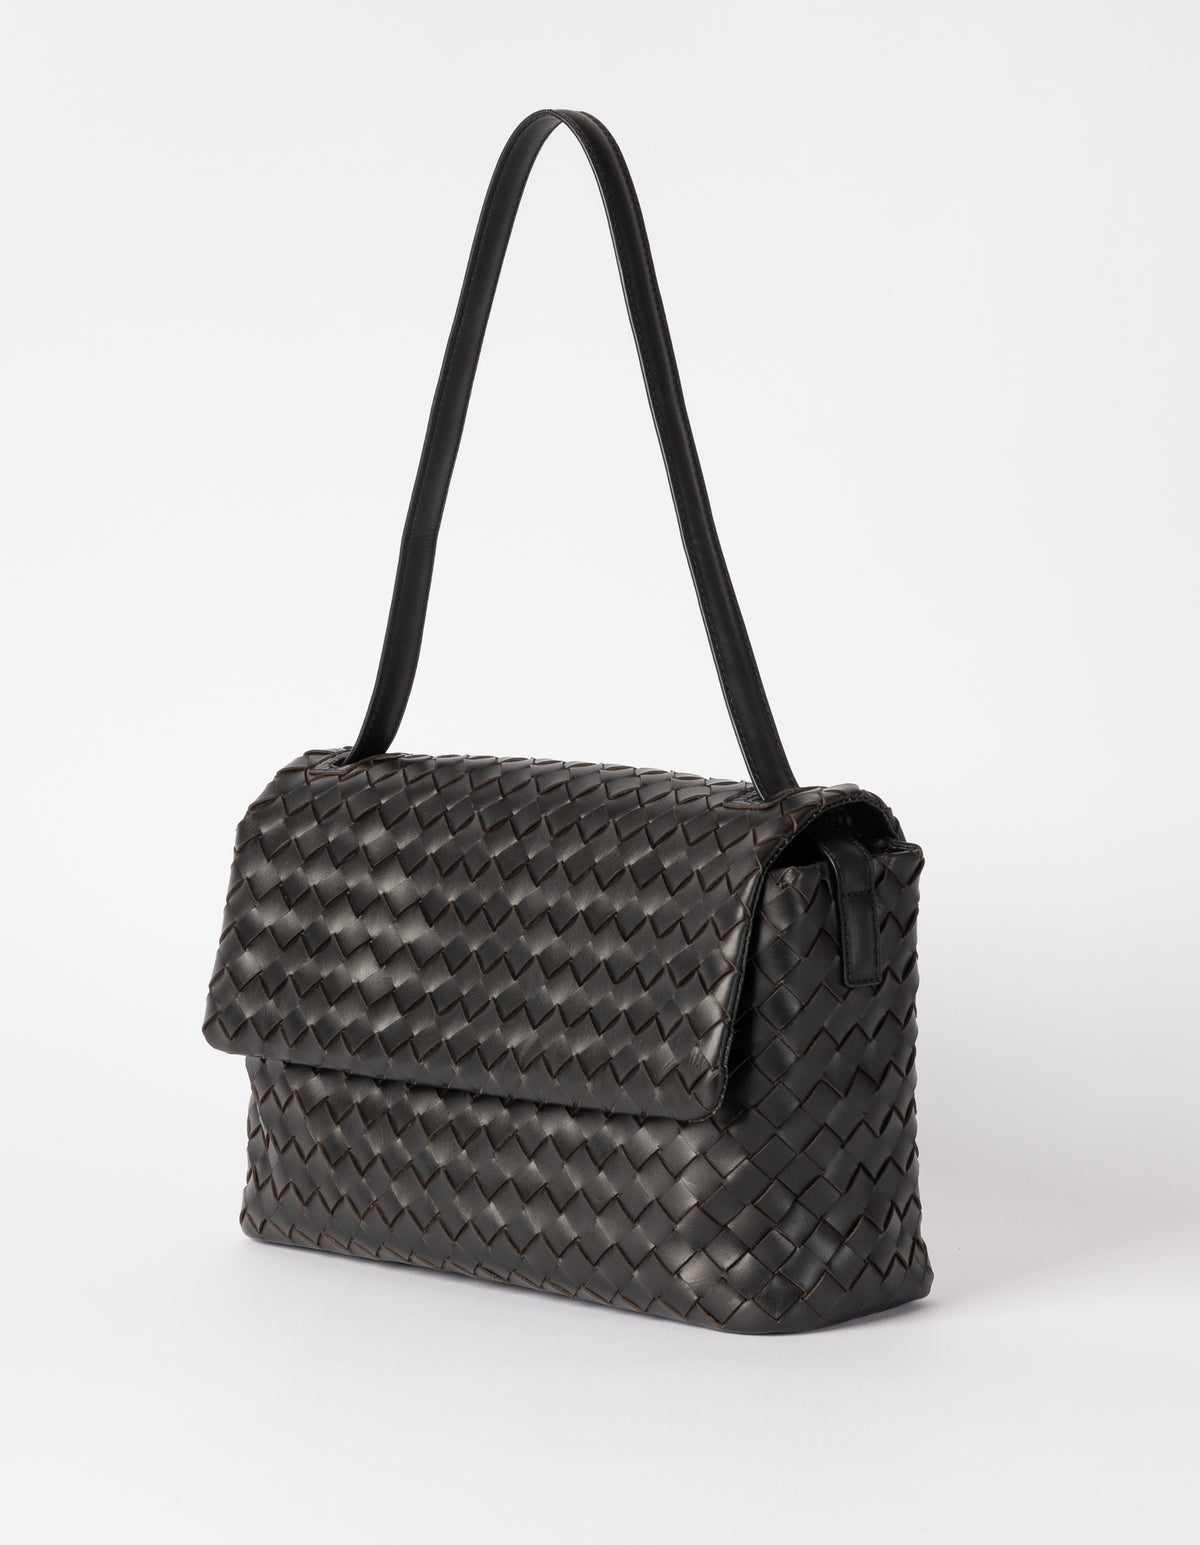 KENZIE, Black Woven Classic Leather